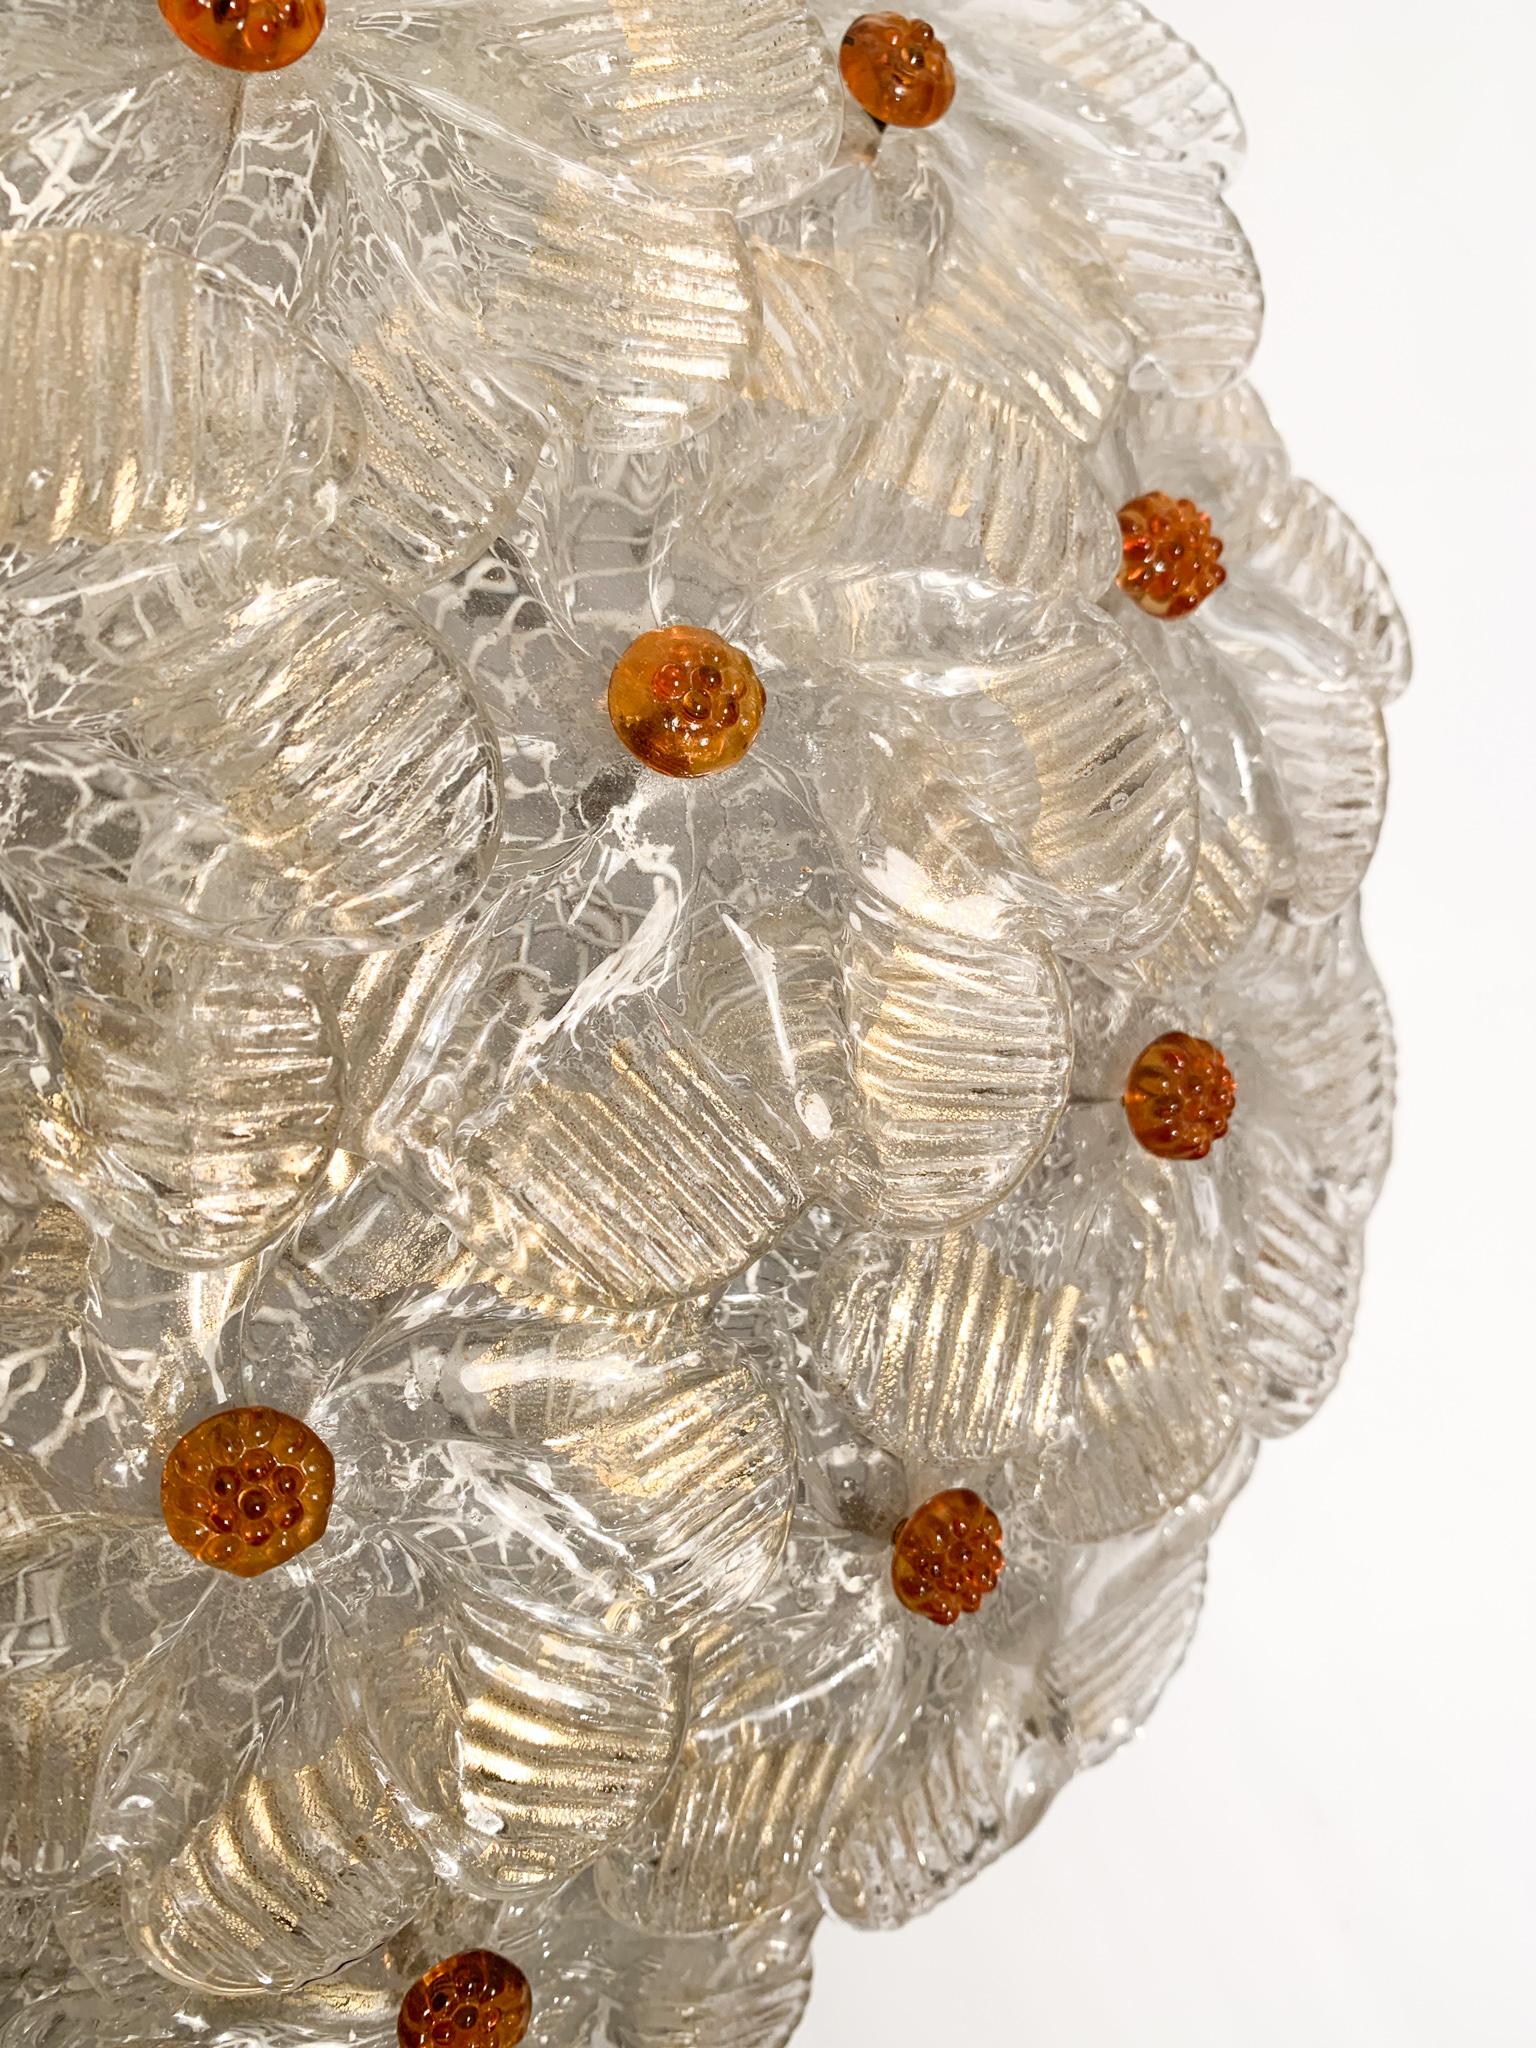 Metal Millefiori Ceiling Light by Barovier & Toso in Murano Glass from the 1950s